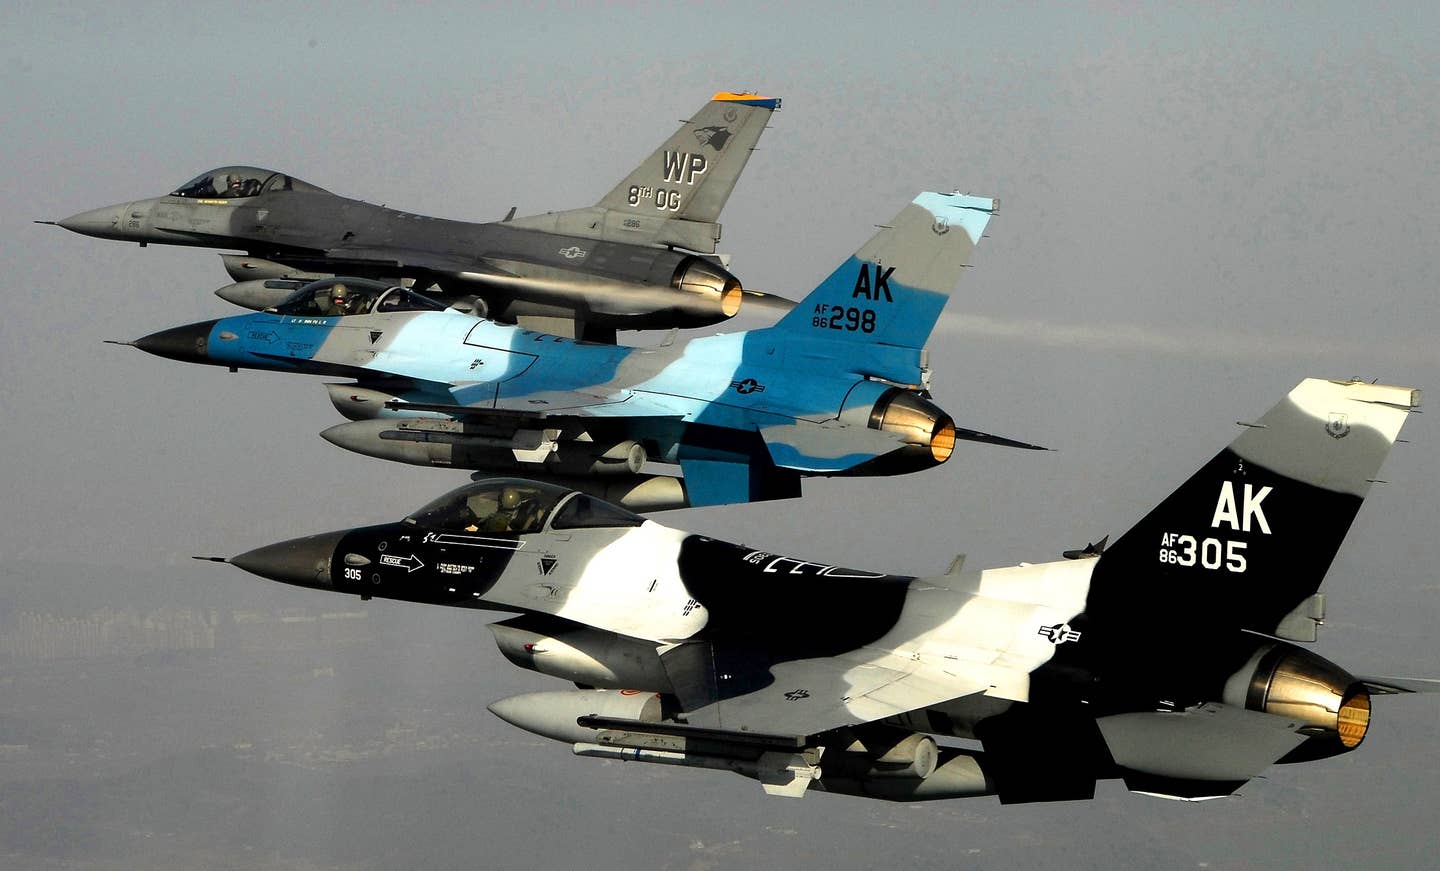 Three U.S. Air Force F-16 Fighting Falcon Block 30 aircraft from the 80th Fighter Squadron fly in formation over South Korea during a training mission on Jan. 9, 2008. (DoD photo by Tech. Sgt. Quinton T. Burris, U.S. Air Force)